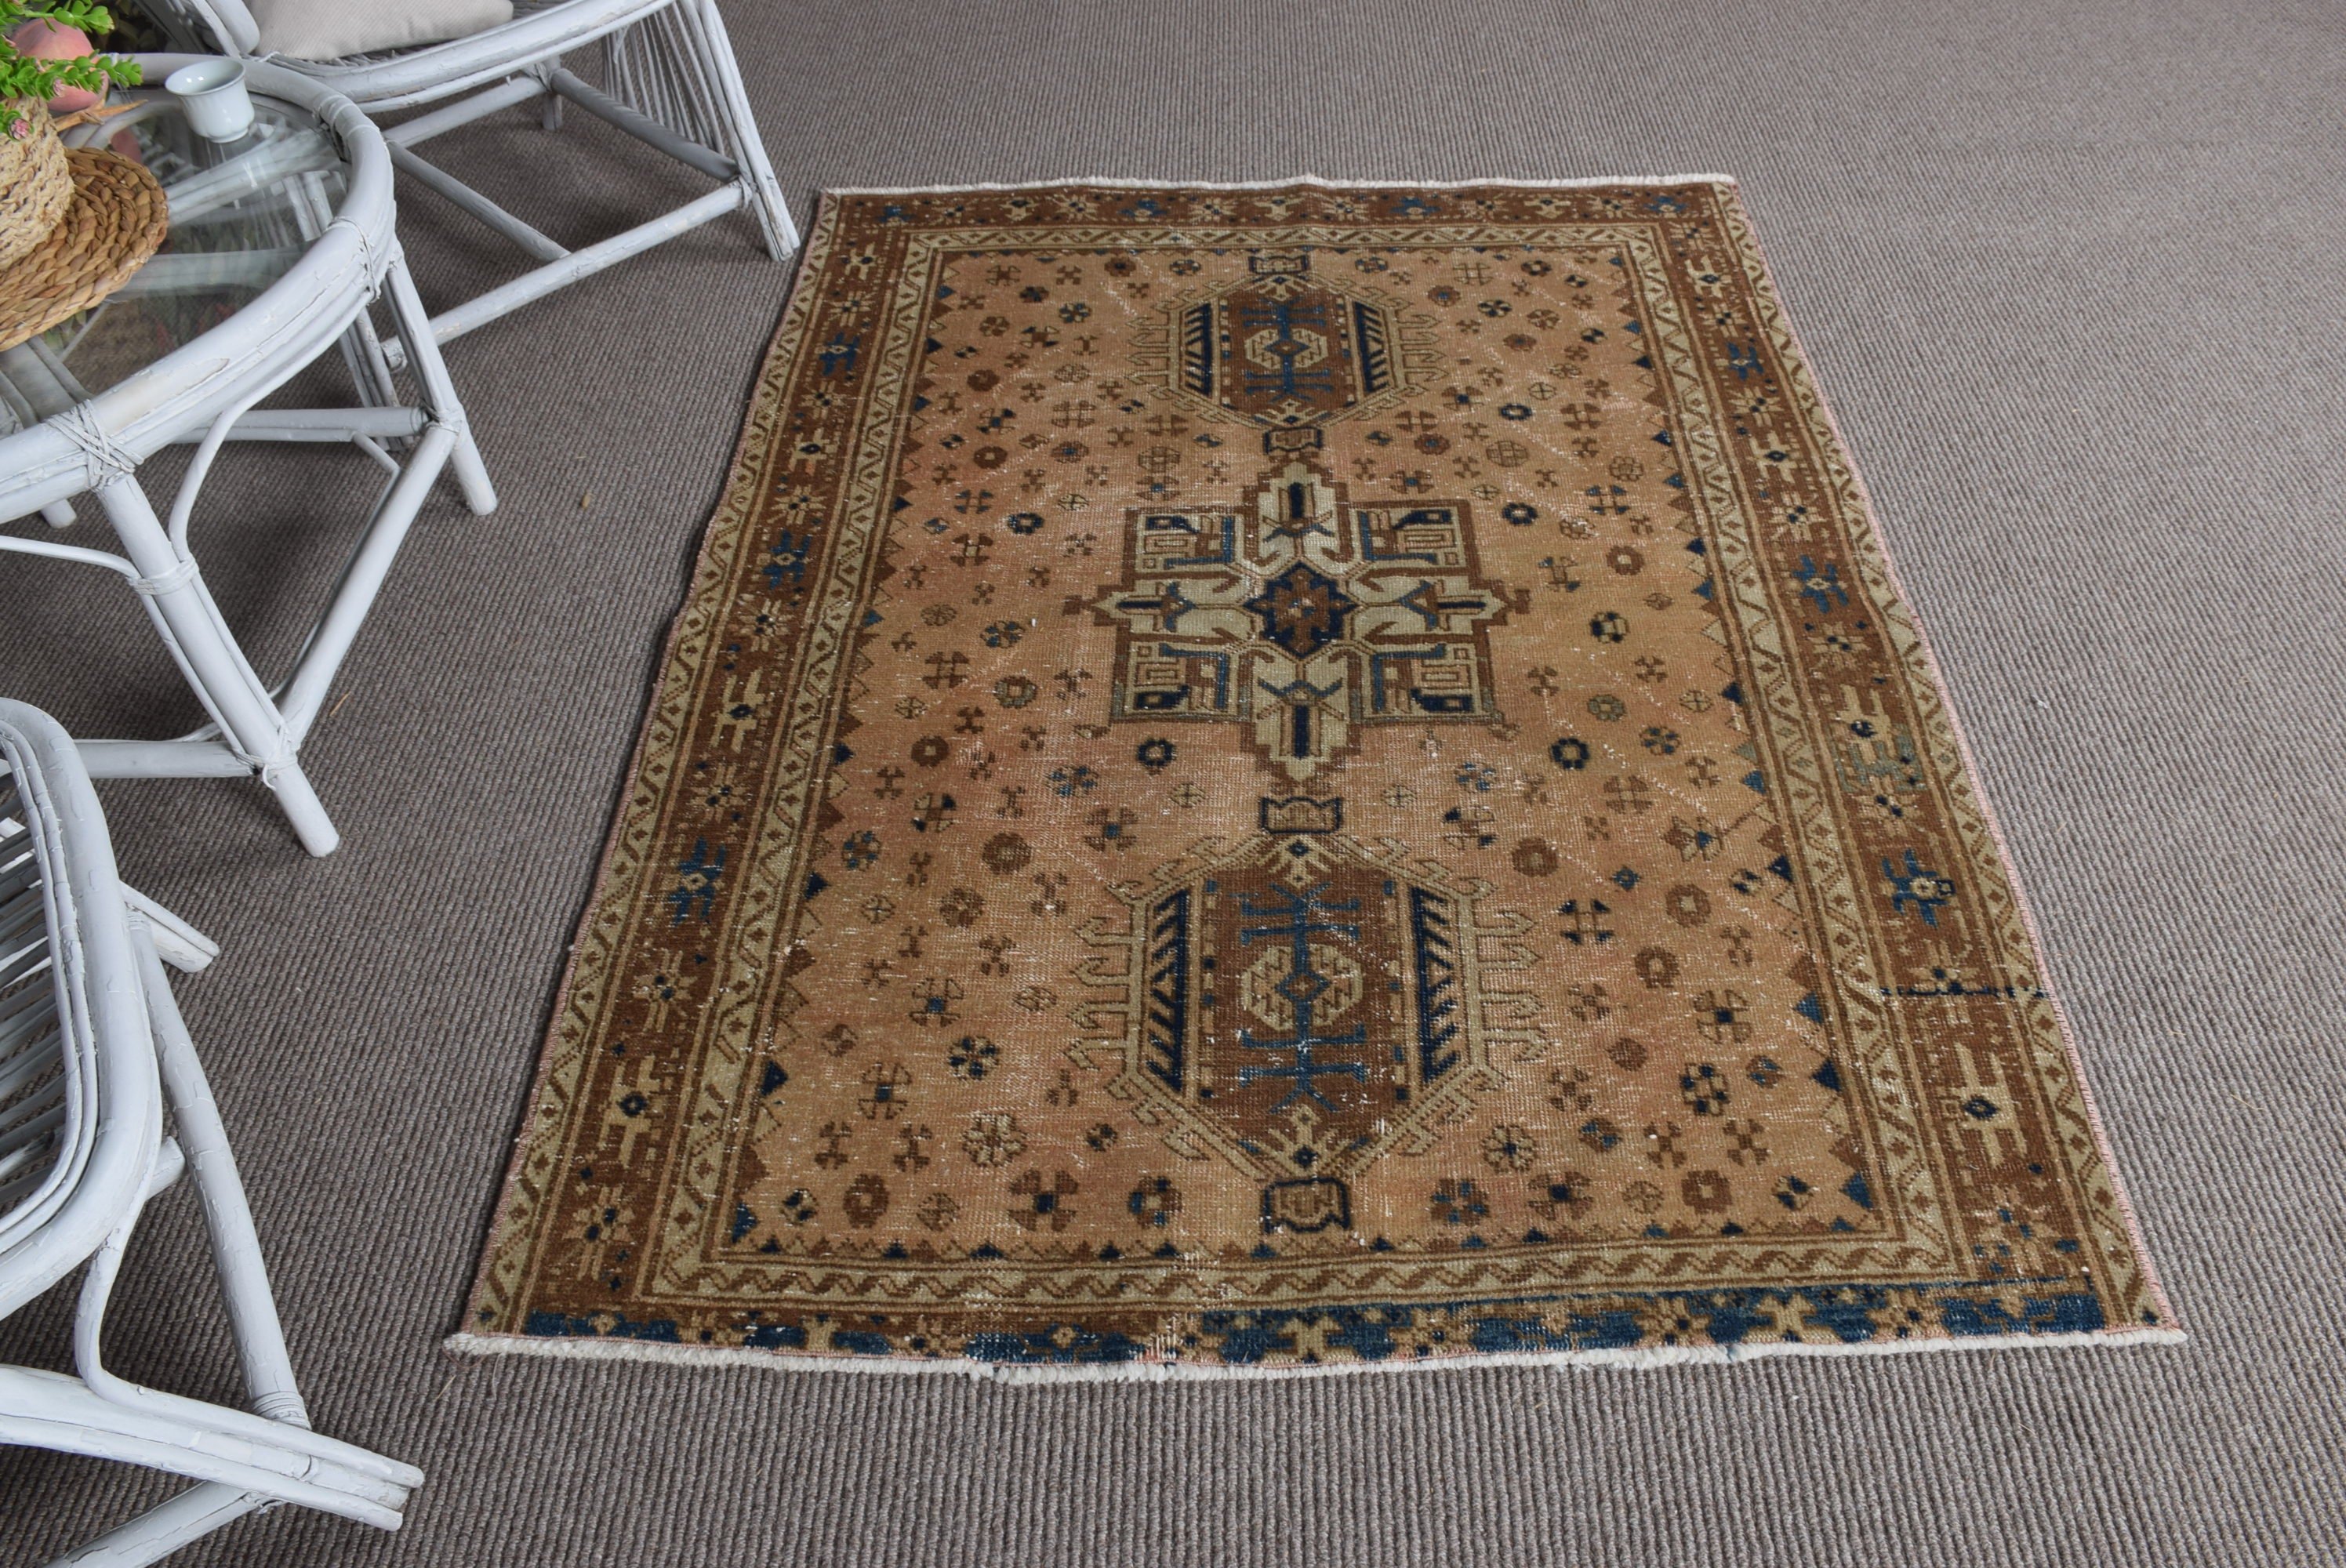 Anatolian Rug, Vintage Rug, Antique Rugs, Green Cool Rugs, Rugs for Entry, 3.8x5.2 ft Accent Rugs, Turkish Rugs, Bedroom Rugs, Nursery Rug